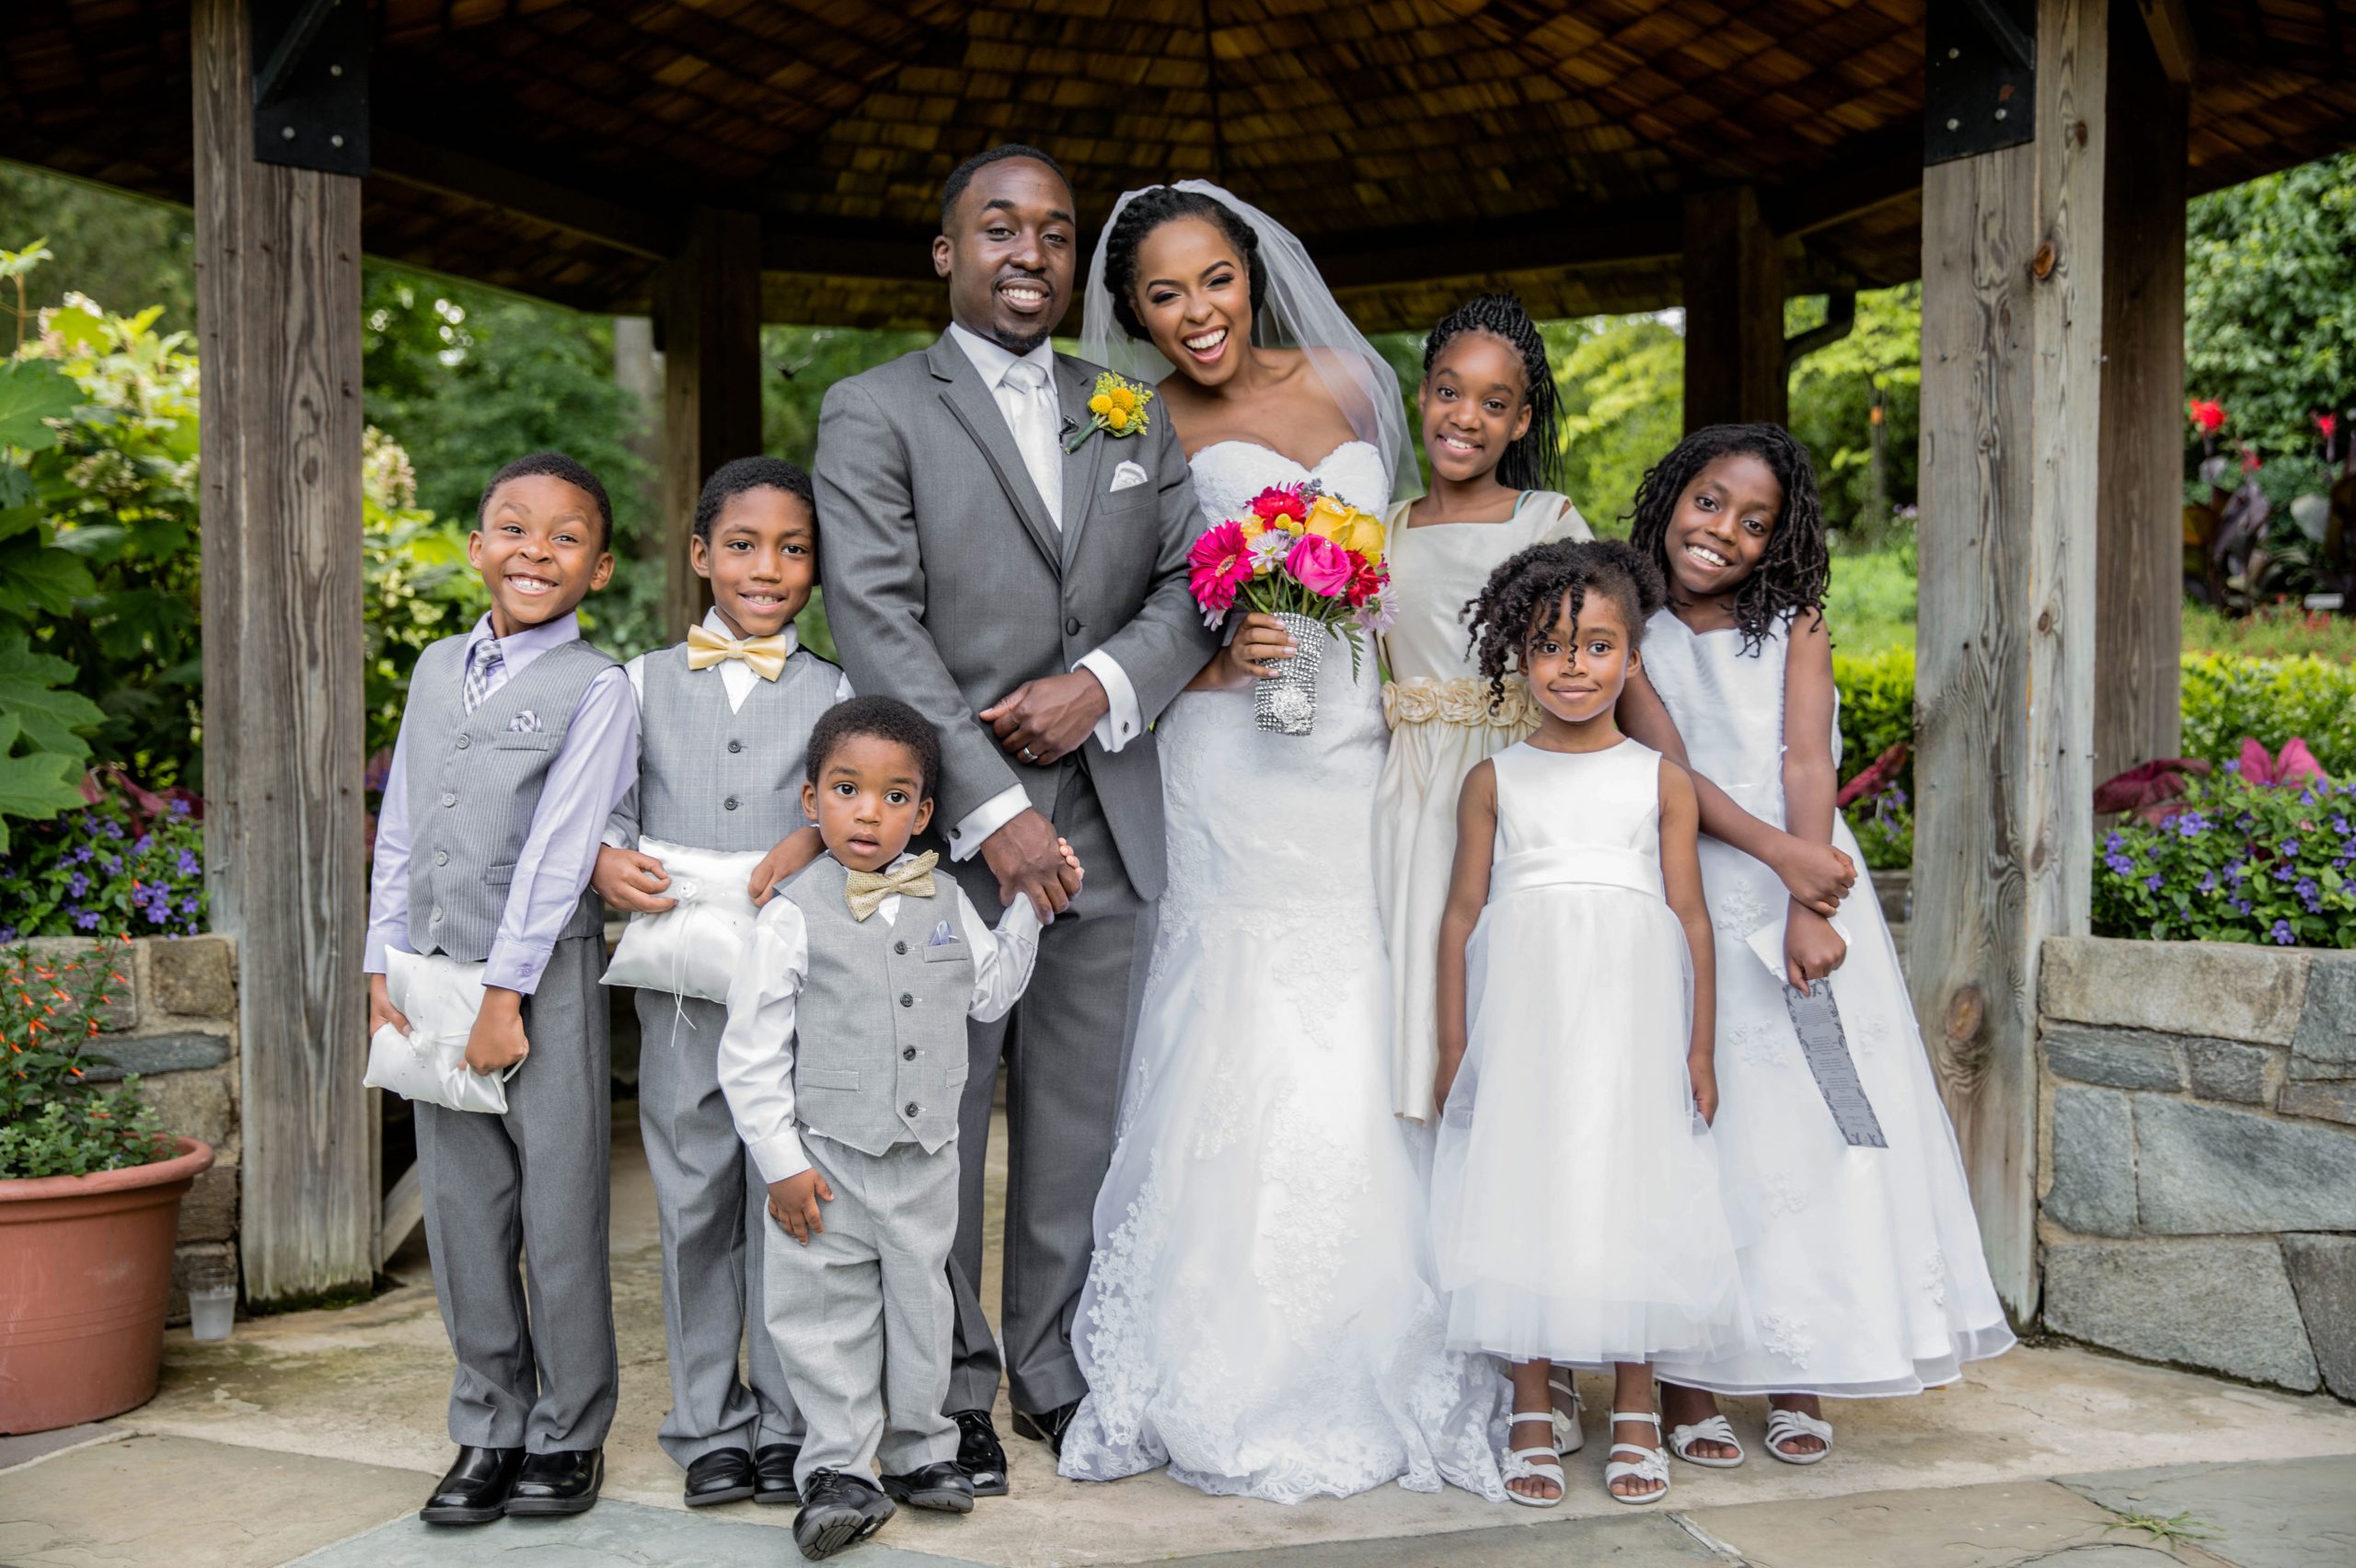 A bride and groom surrounded by young ring bearers and flower girls.